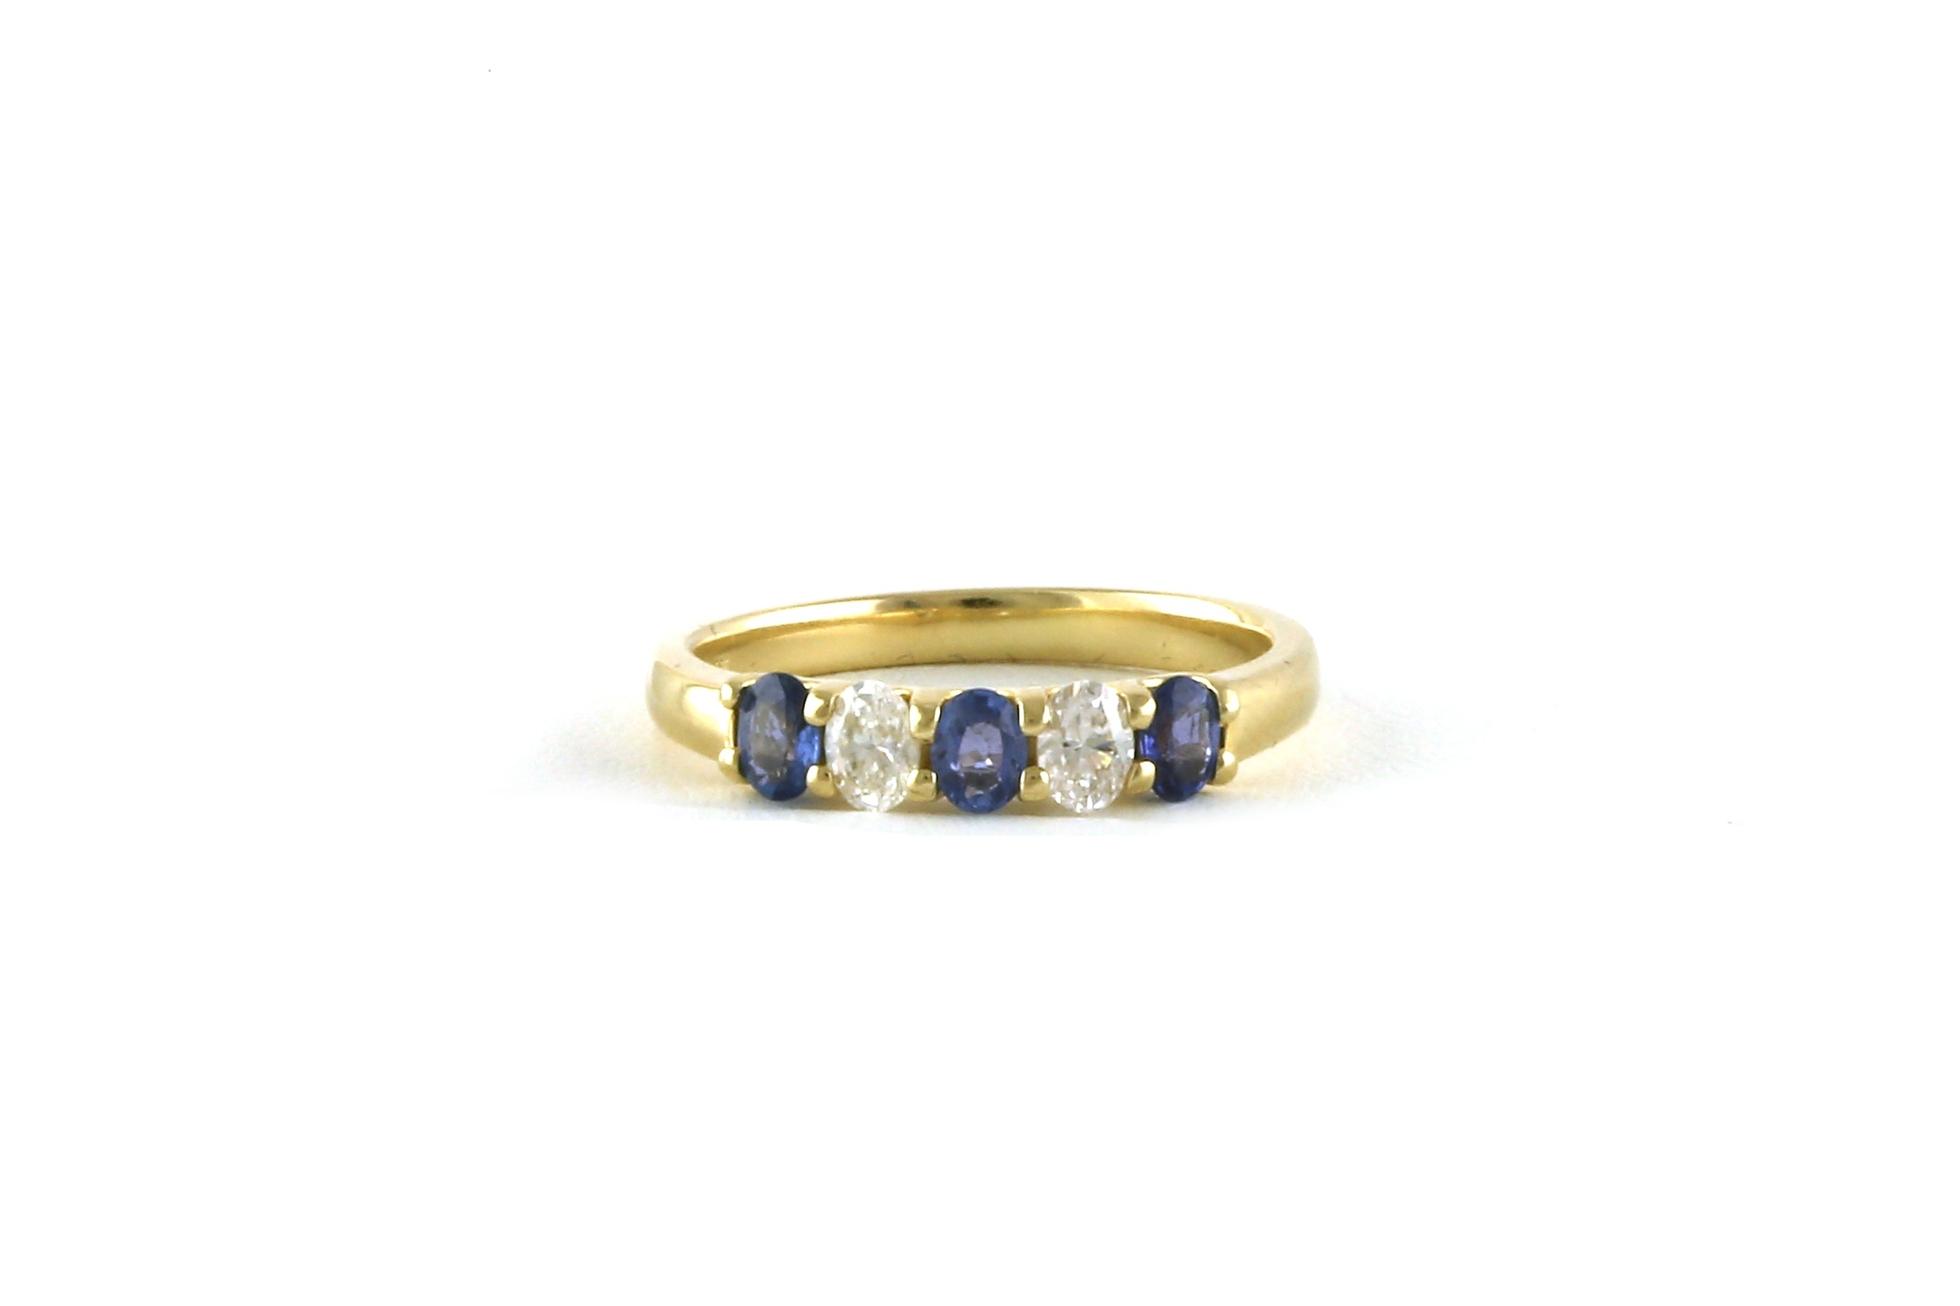 5-Stone Prong-set Montana Yogo Sapphire and Diamond Ring in Yellow Gold (0.85cts TWT)